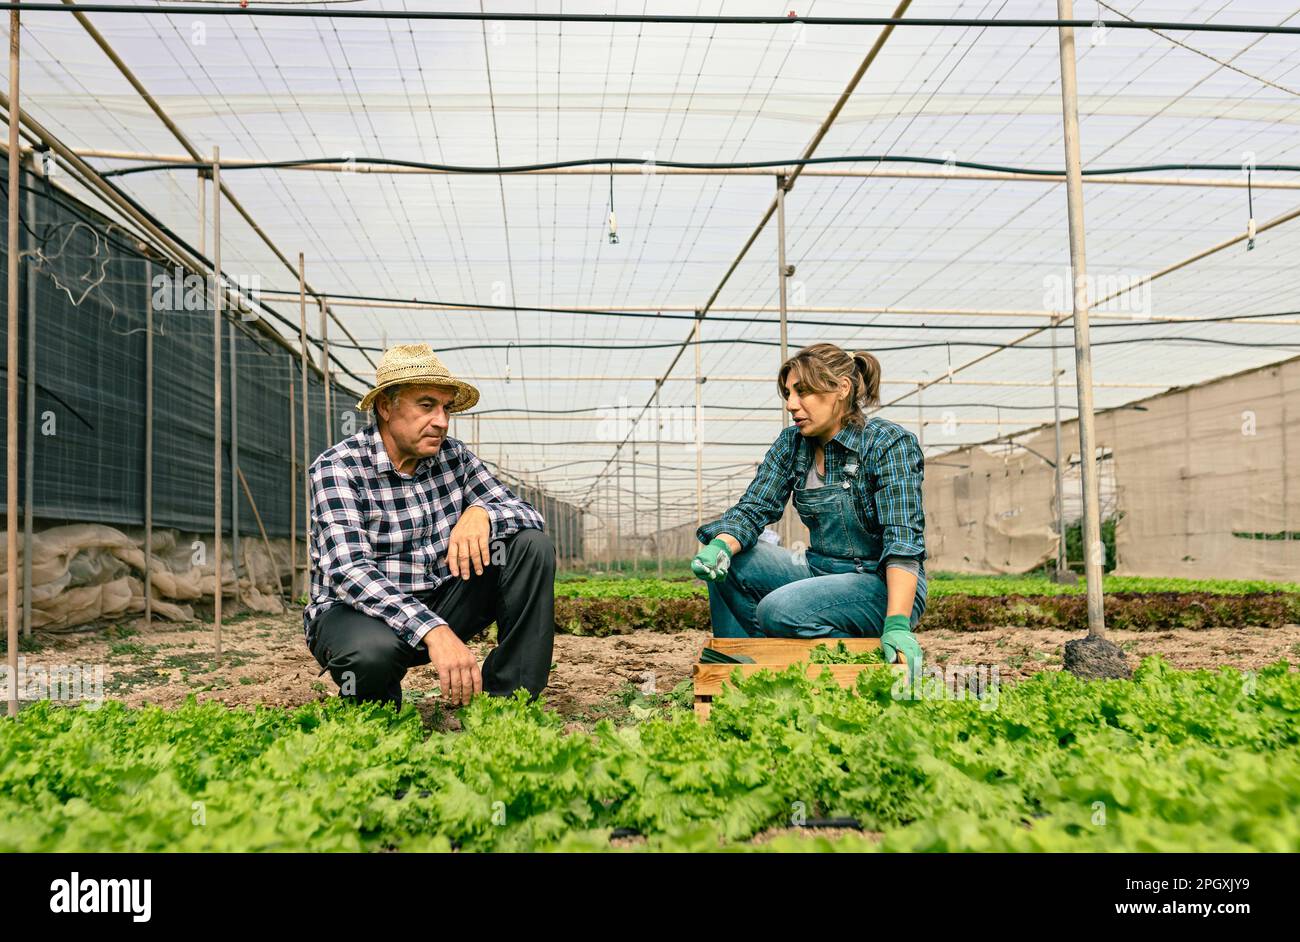 Farmer workers harvesting lettuce and vegetables from the greenhouse  - Farm people lifestyle concept Stock Photo